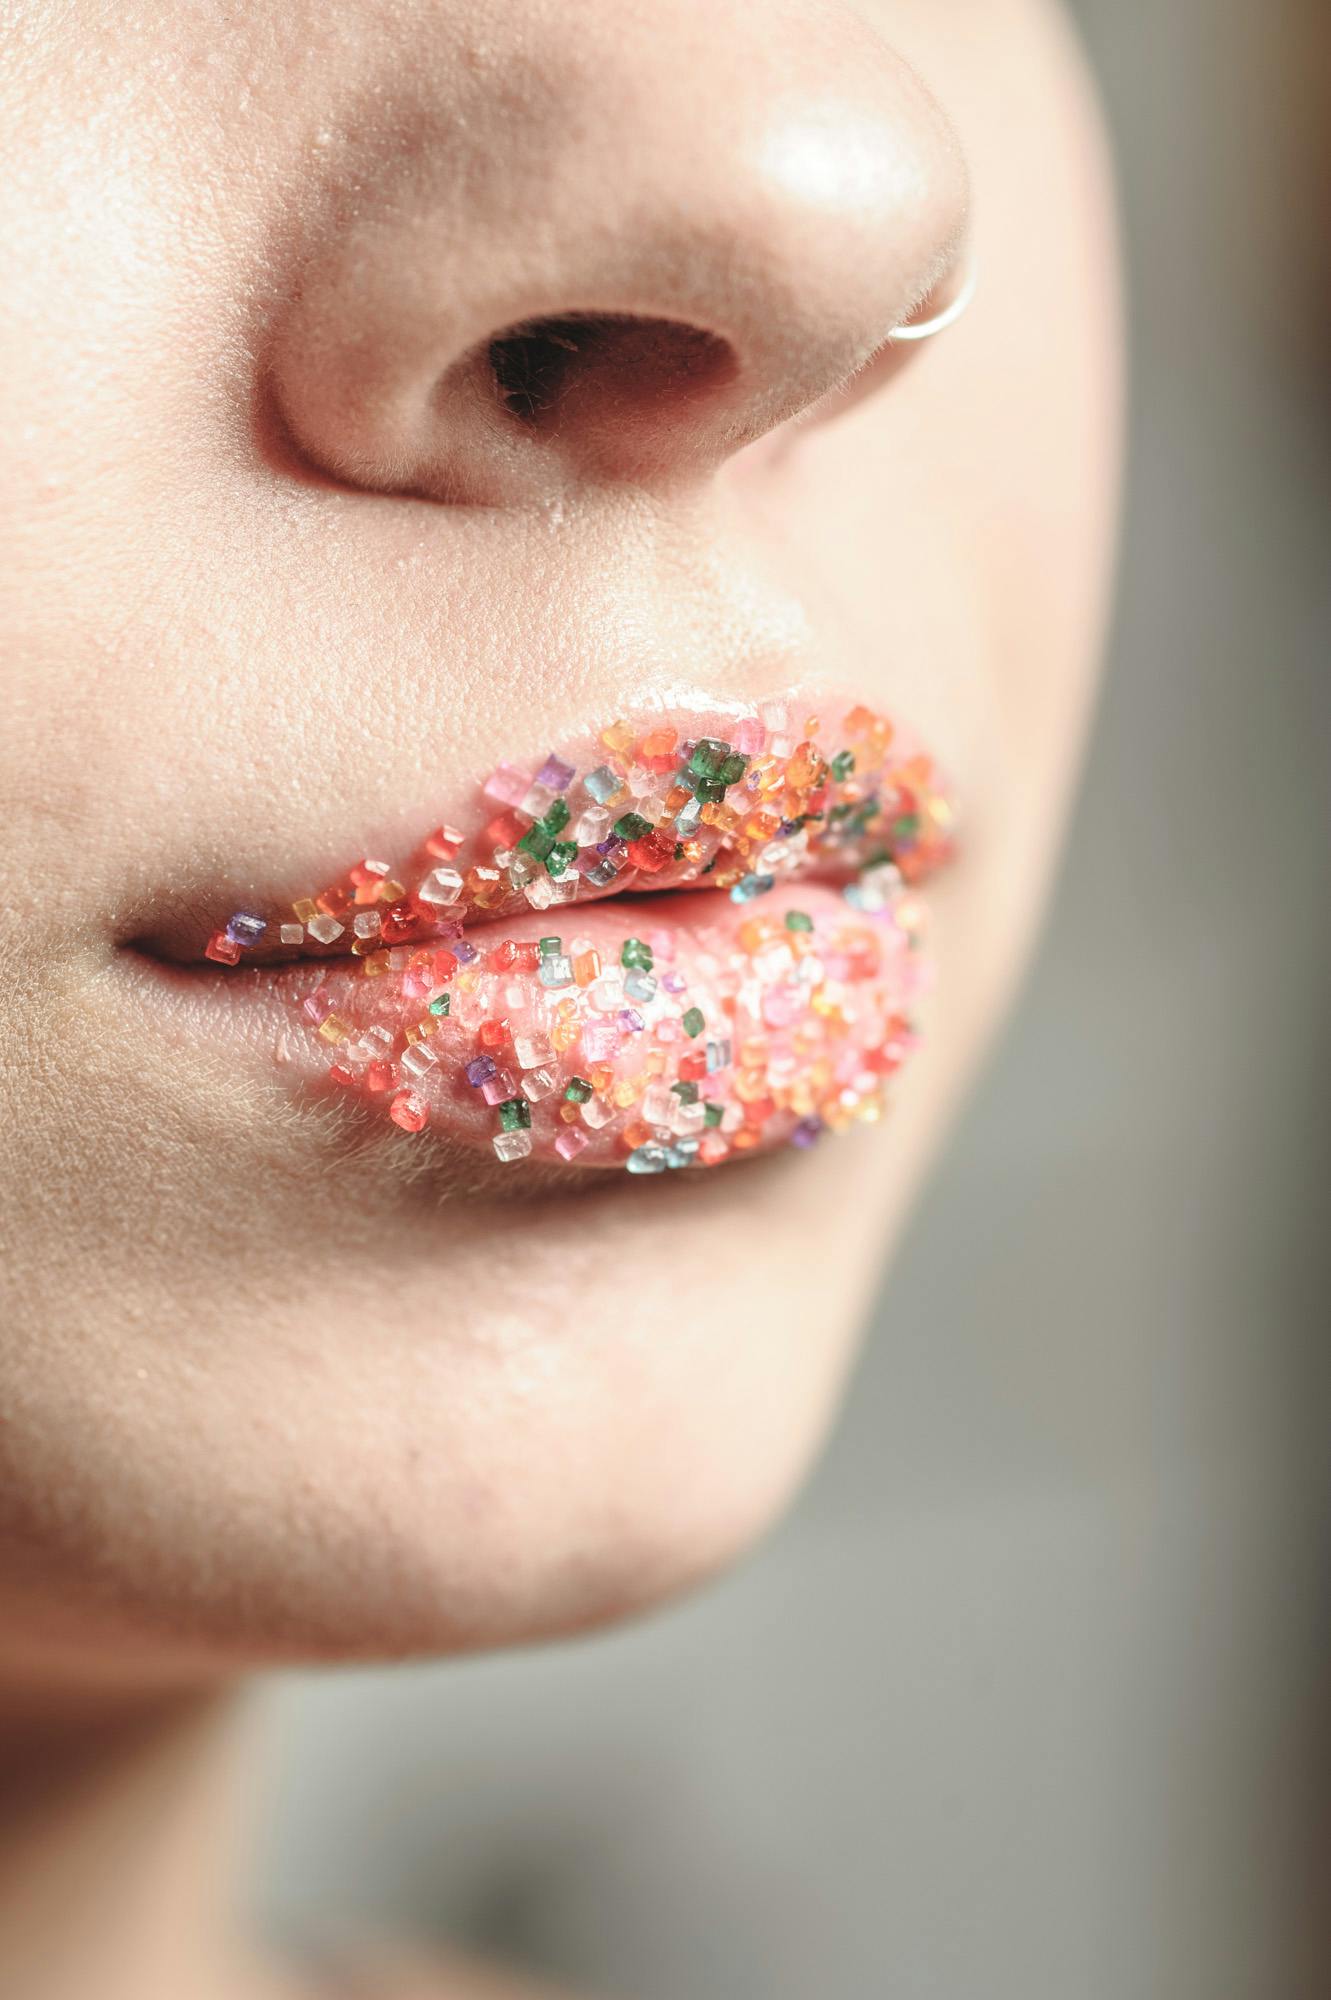 a close up portrait of Caty's lips with candied glitter covered lips.